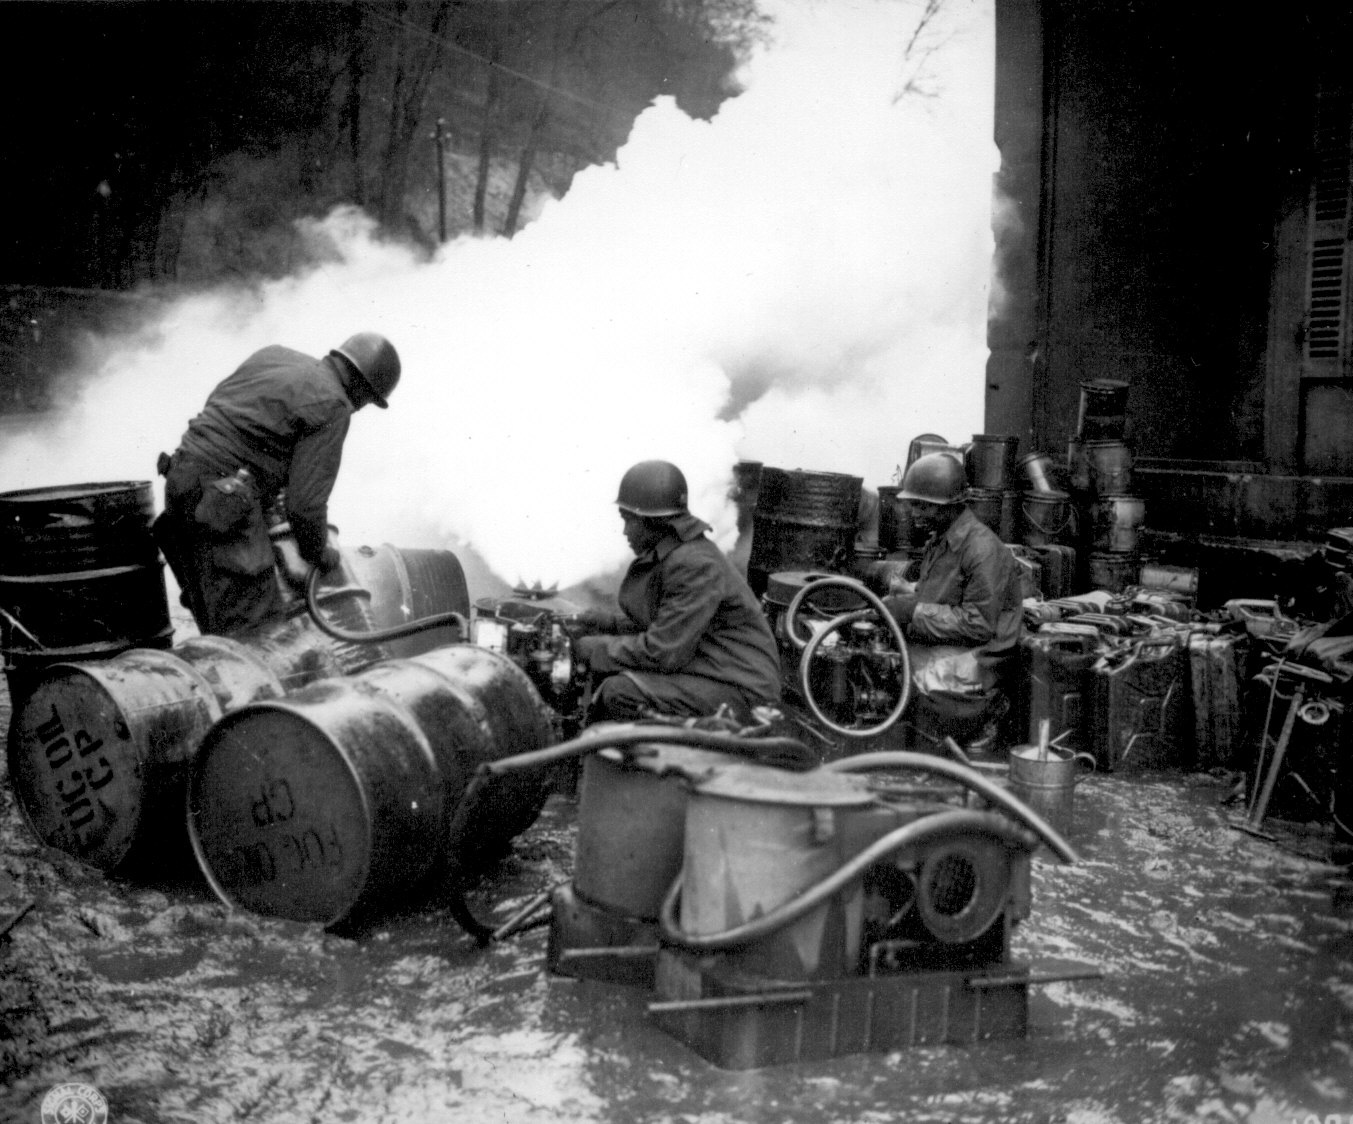 African-American soldiers of the 161st Chemical Smoke Generating Company of the US 3rd Army refilling a M-2 smoke generator, at the Saar River near Wallerfangen, Germany, 11 Dec 1944